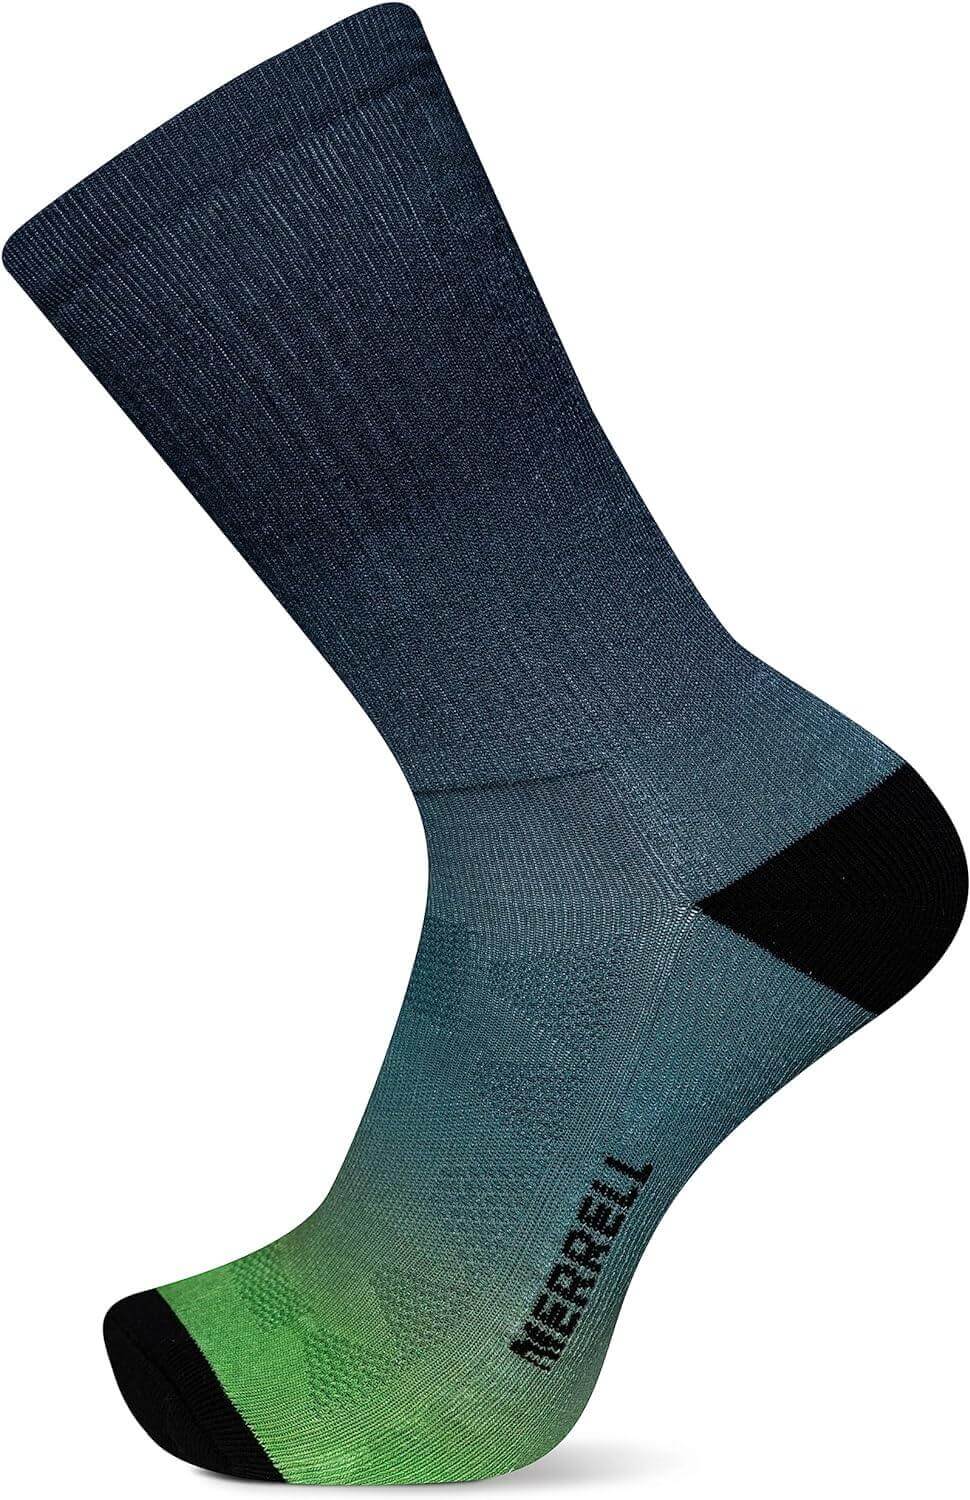 Shop The Latest >Merrell Men's and Women's Moab Hiking Mid Cushion Socks > *Only $18.61*> From The Top Brand > *Merrelll* > Shop Now and Get Free Shipping On Orders Over $45.00 >*Shop Earth Foot*